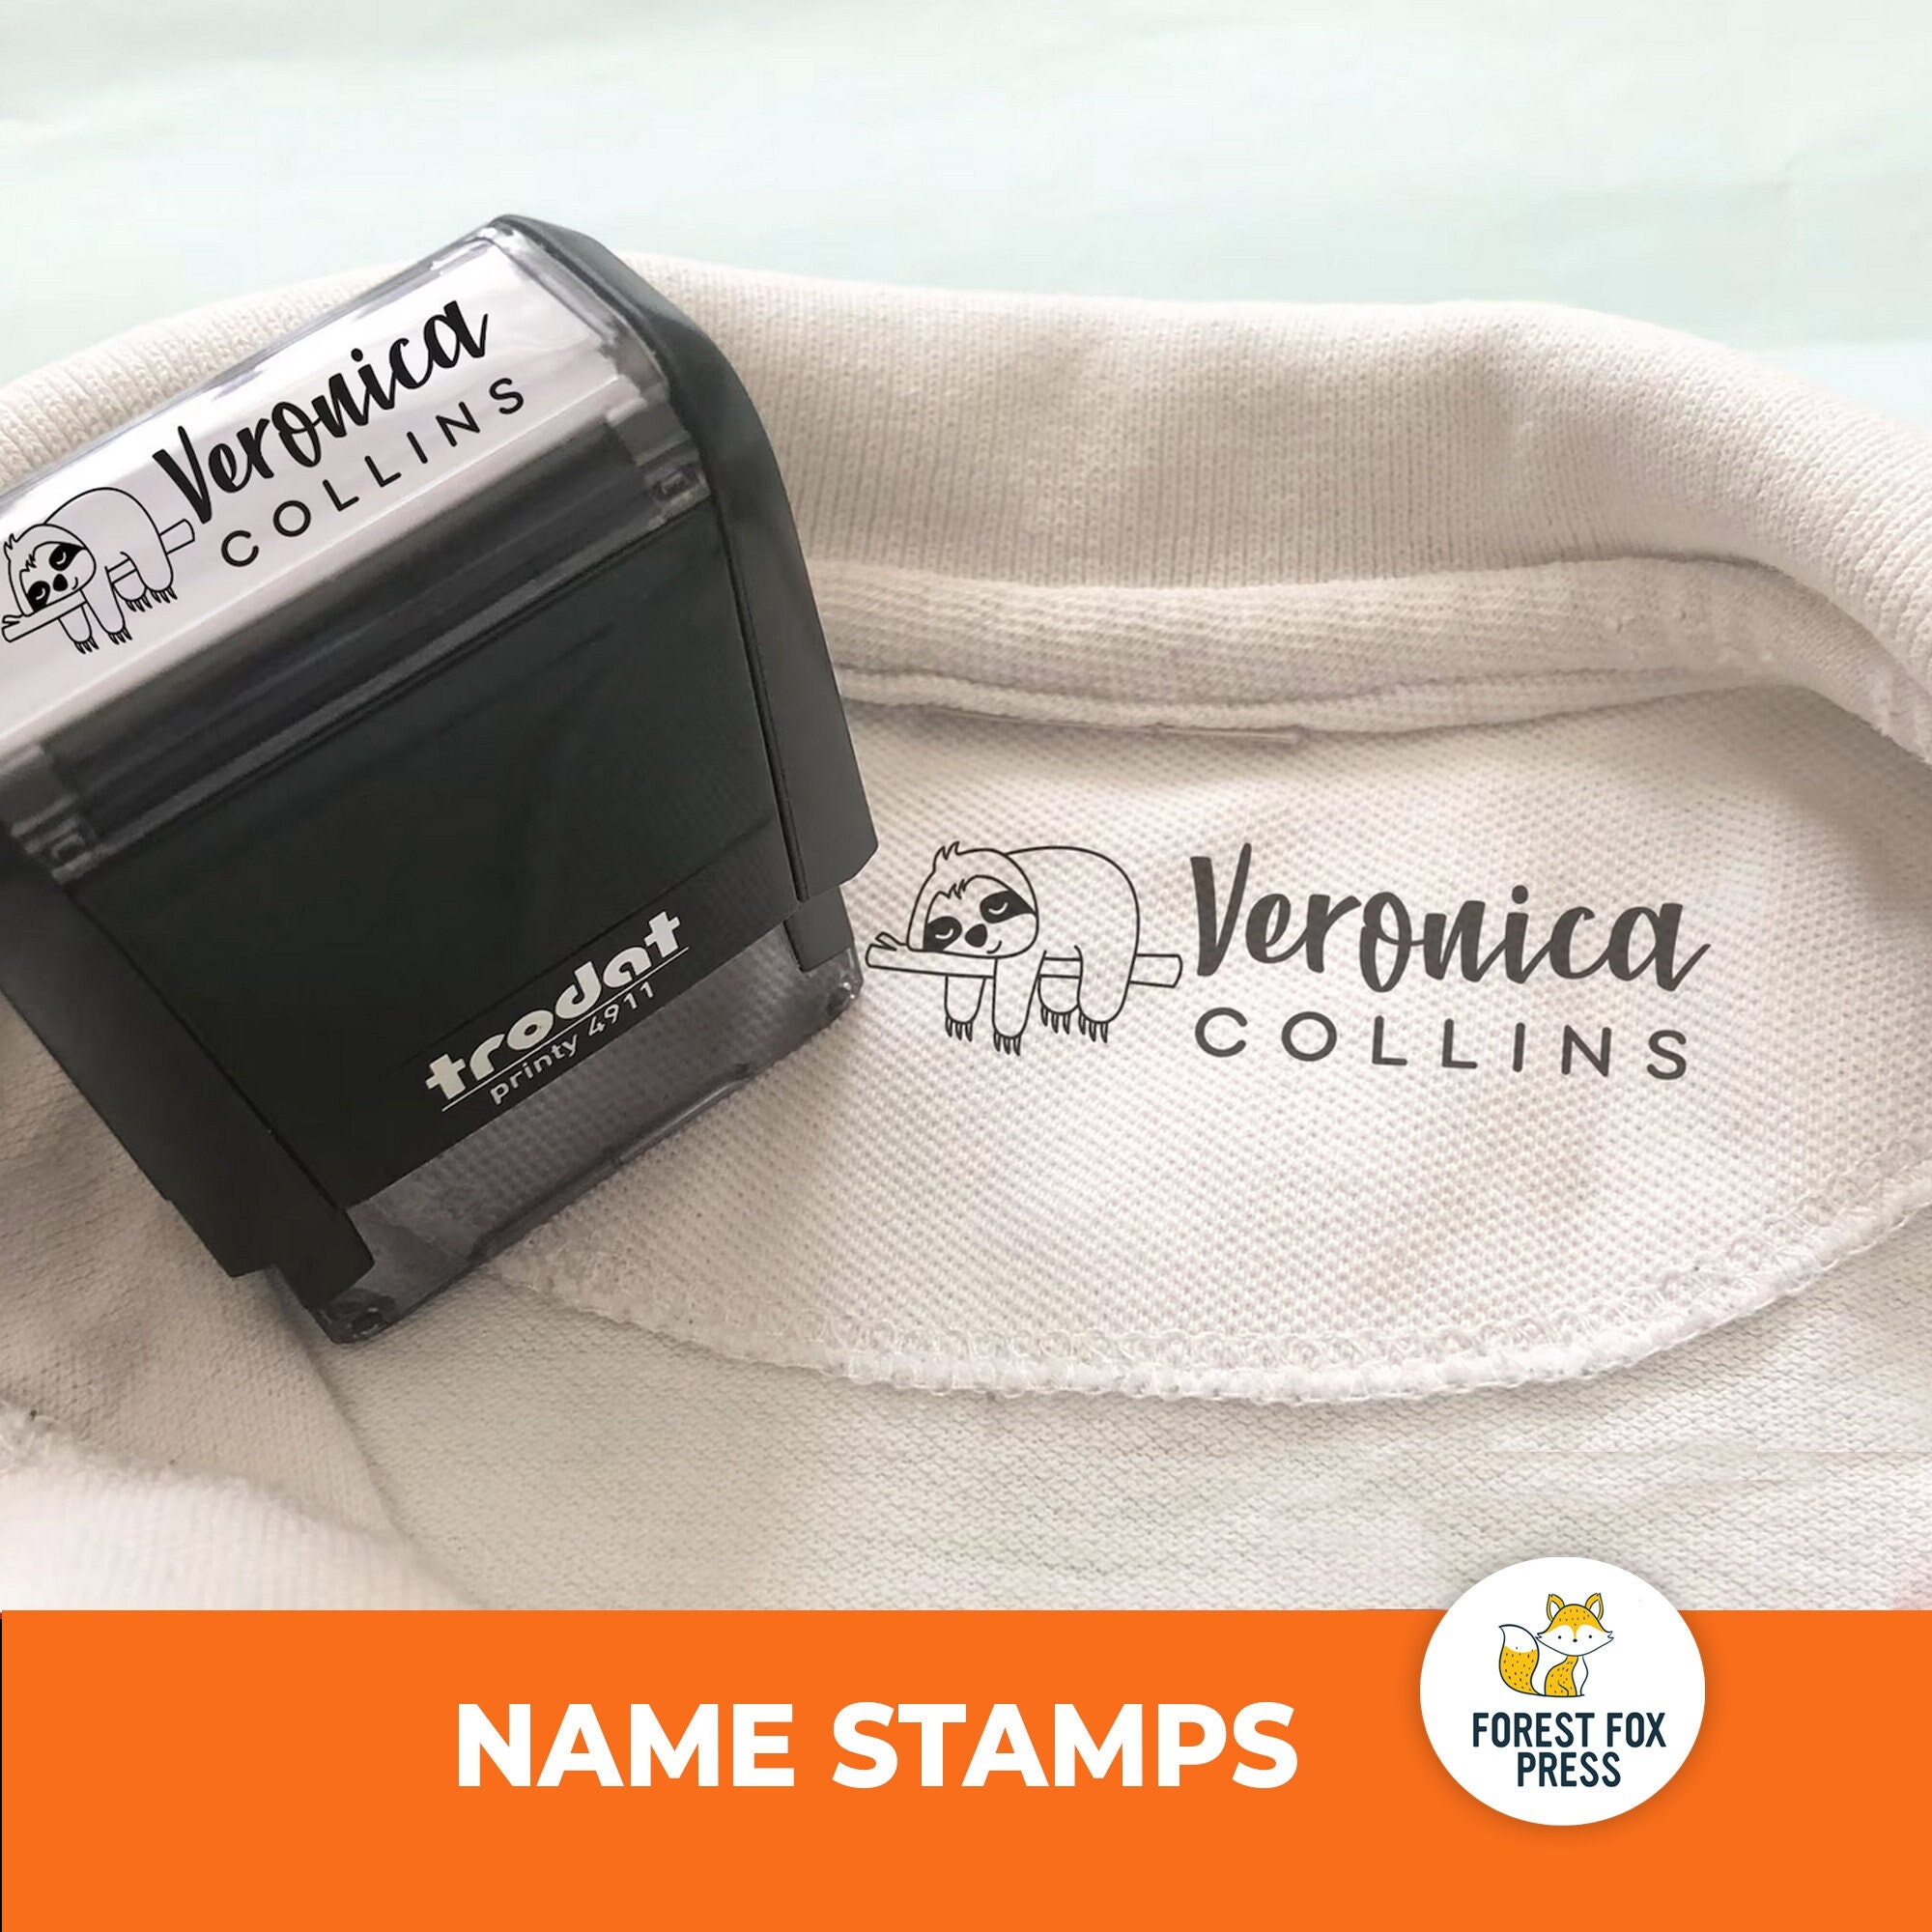 Clothing Fabric Camp Stamp 15 Font Options Self-inking Name Stamp